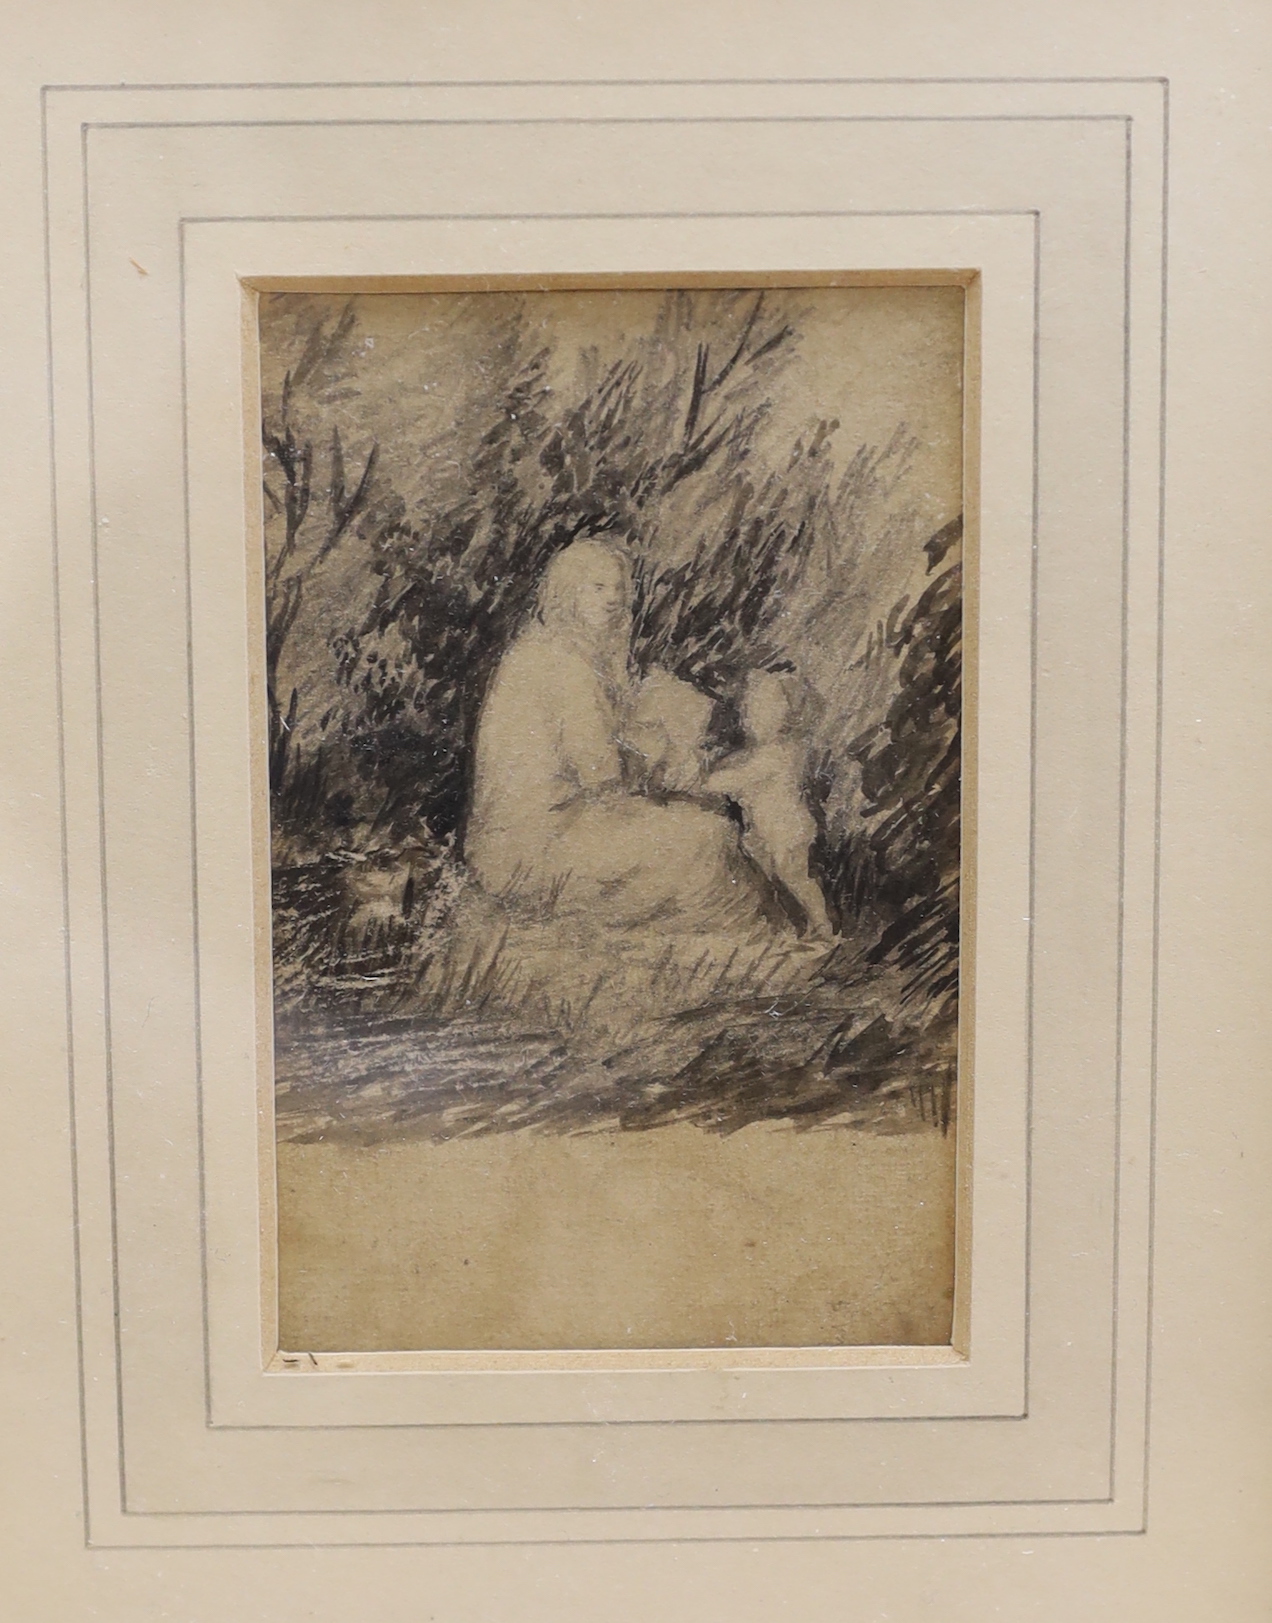 Thomas Bewick (1753-1828) two wood cuts/engravings together with a pencil sketch of a mother and - Image 2 of 5